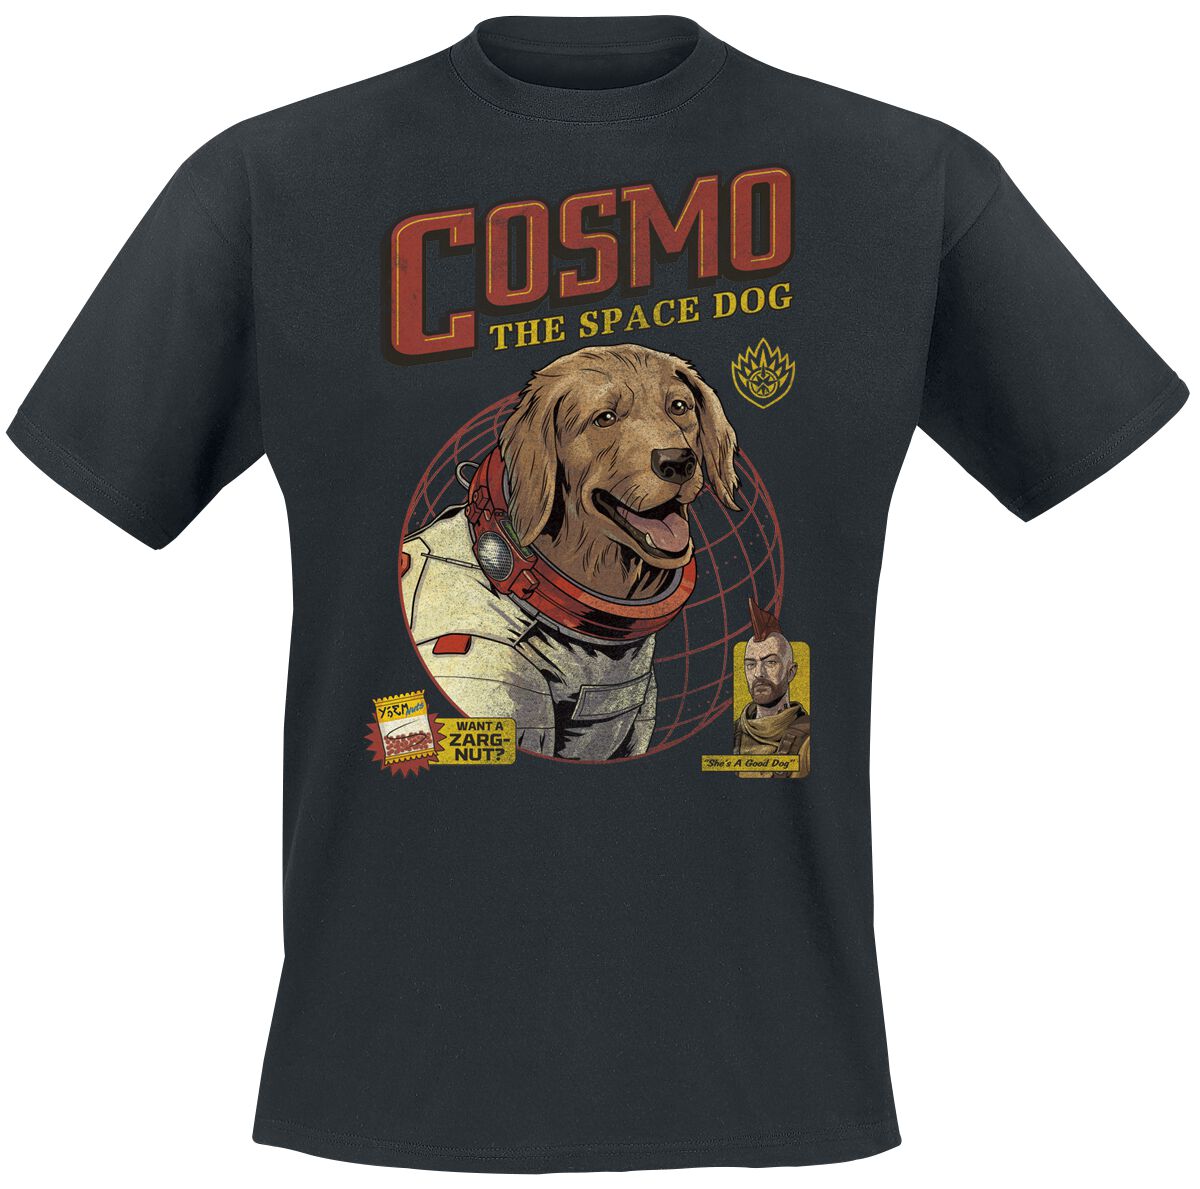 Guardians Of The Galaxy Vol. 3 - Cosmo -The Space Dog T-Shirt schwarz in XXL